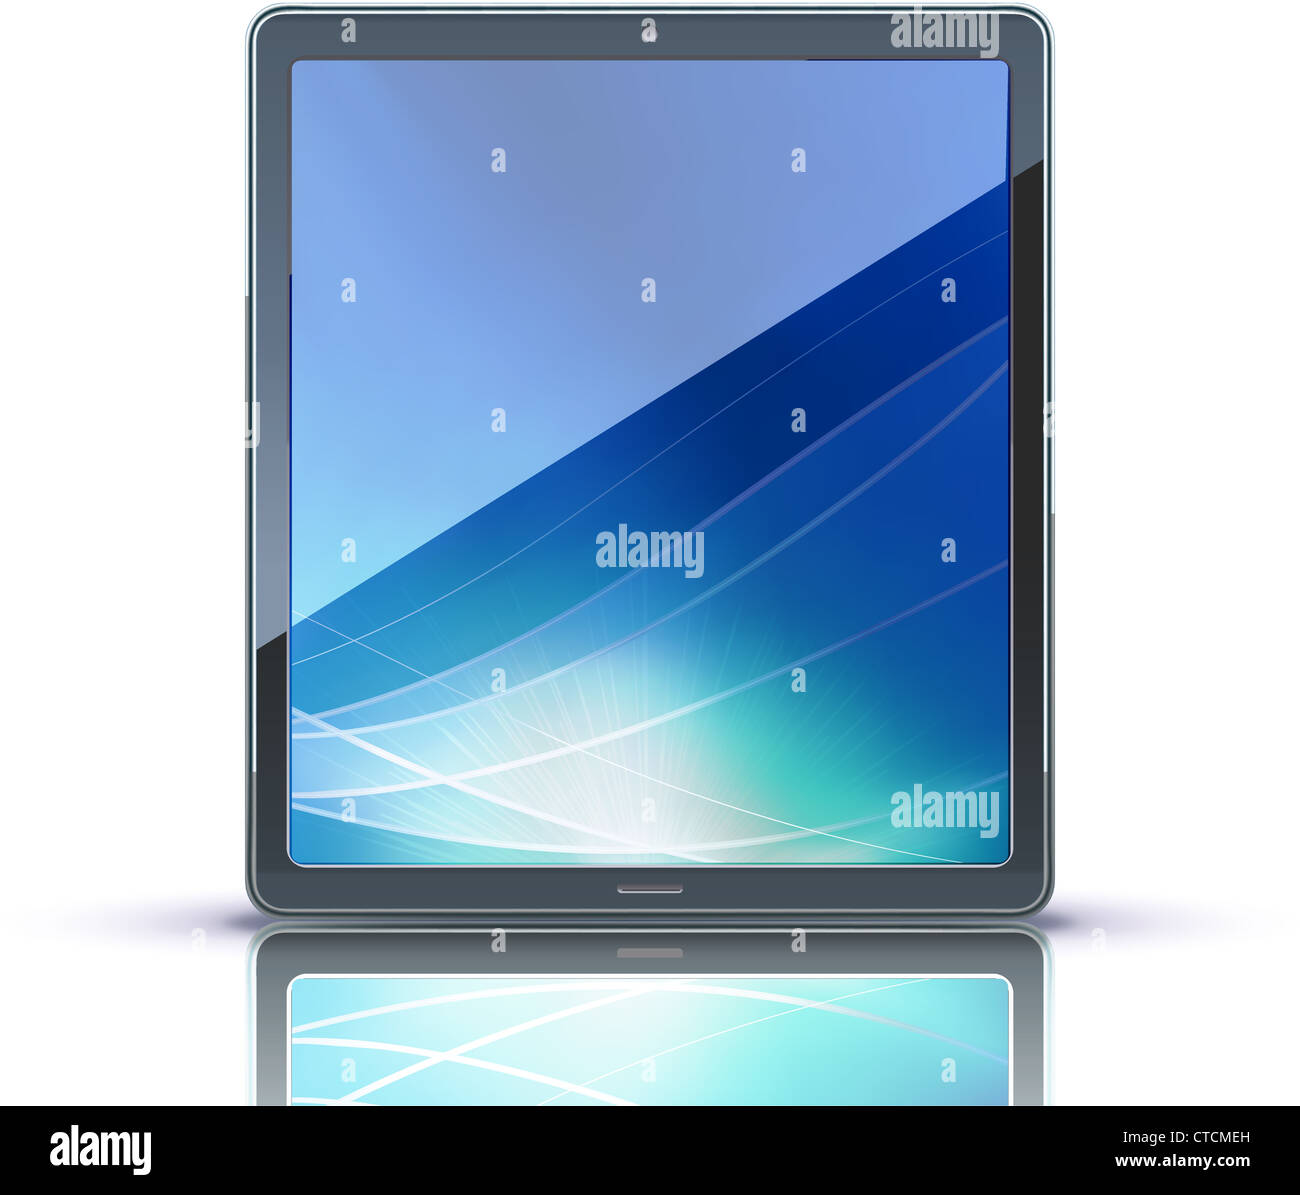 Vector illustration classy tablet PC Ideal your presentation website print purposes screen useful to display message photo text Stock Photo